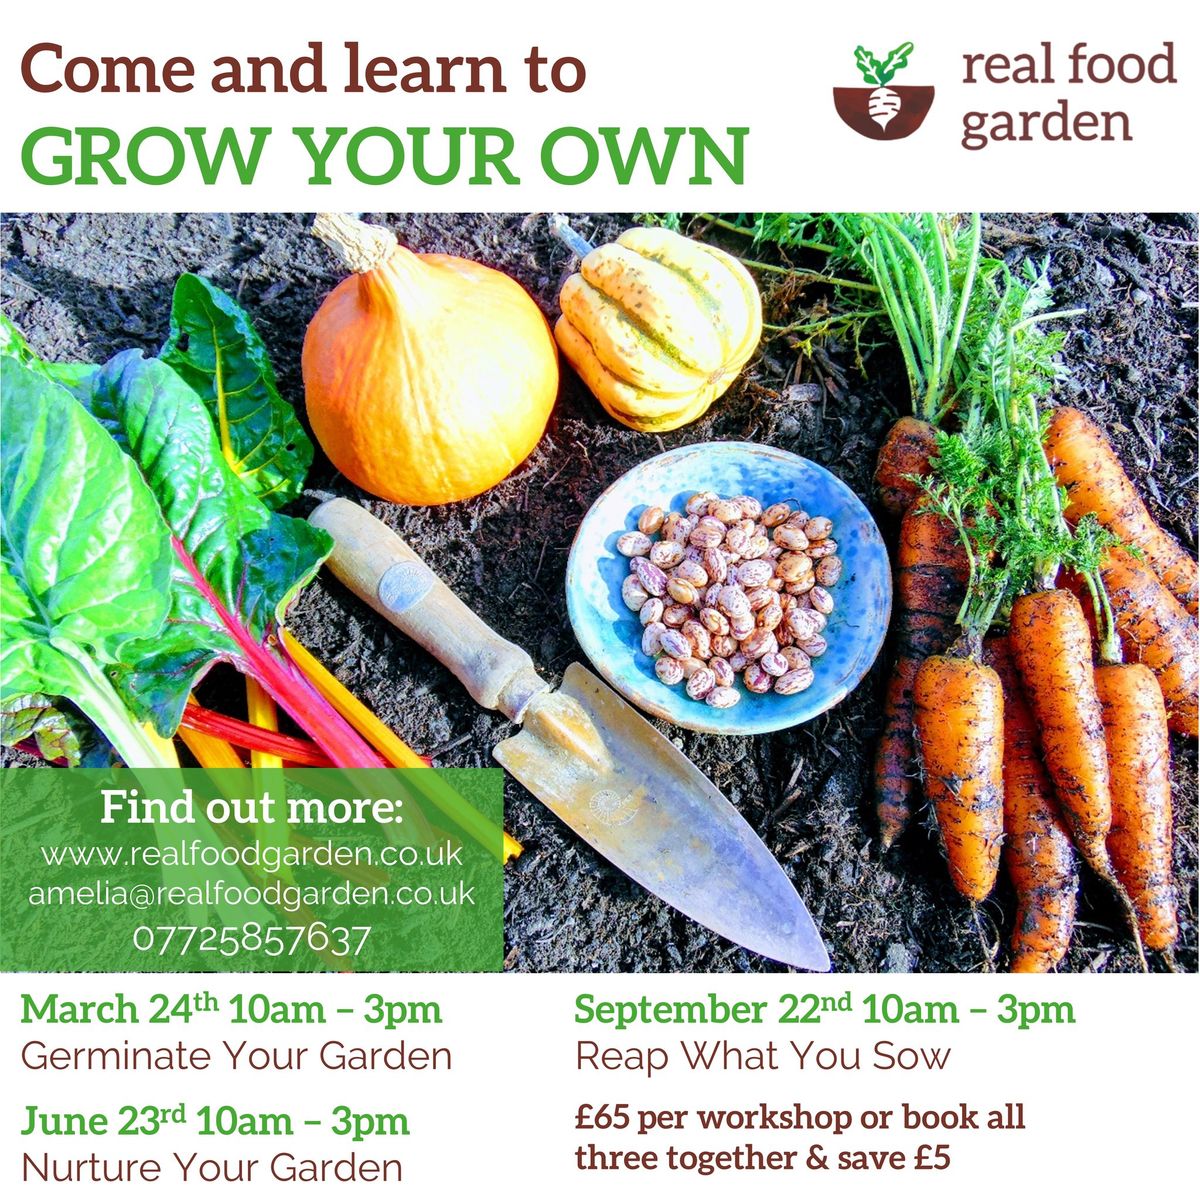 "Reap What You Sow" Workshop